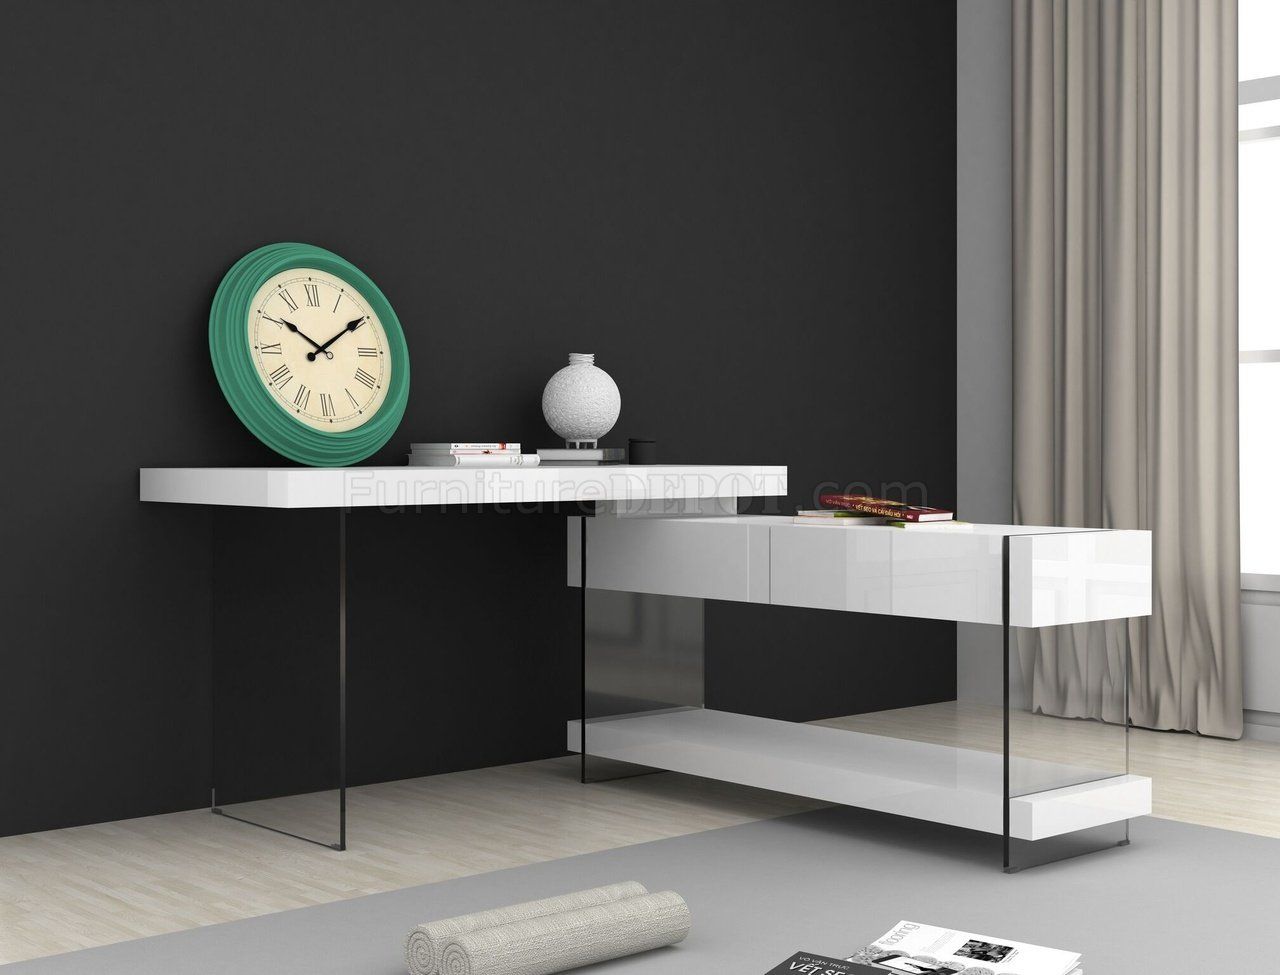 Cloud Modern Office Desk In White Gloss & Glassj&m With Regard To Glossy White And Chrome Modern Desks (View 6 of 15)